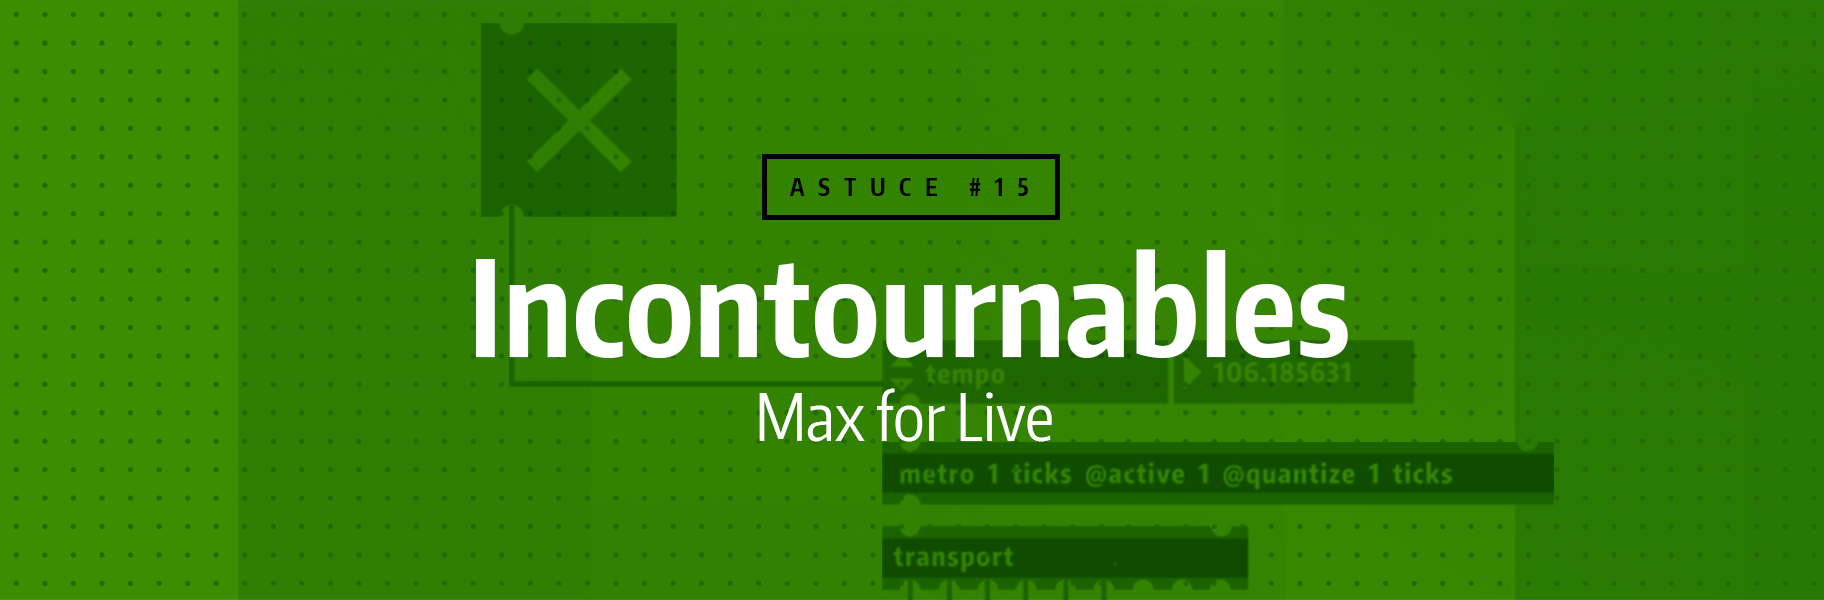 Astuce rapide #15 - Incontournables Max for Live